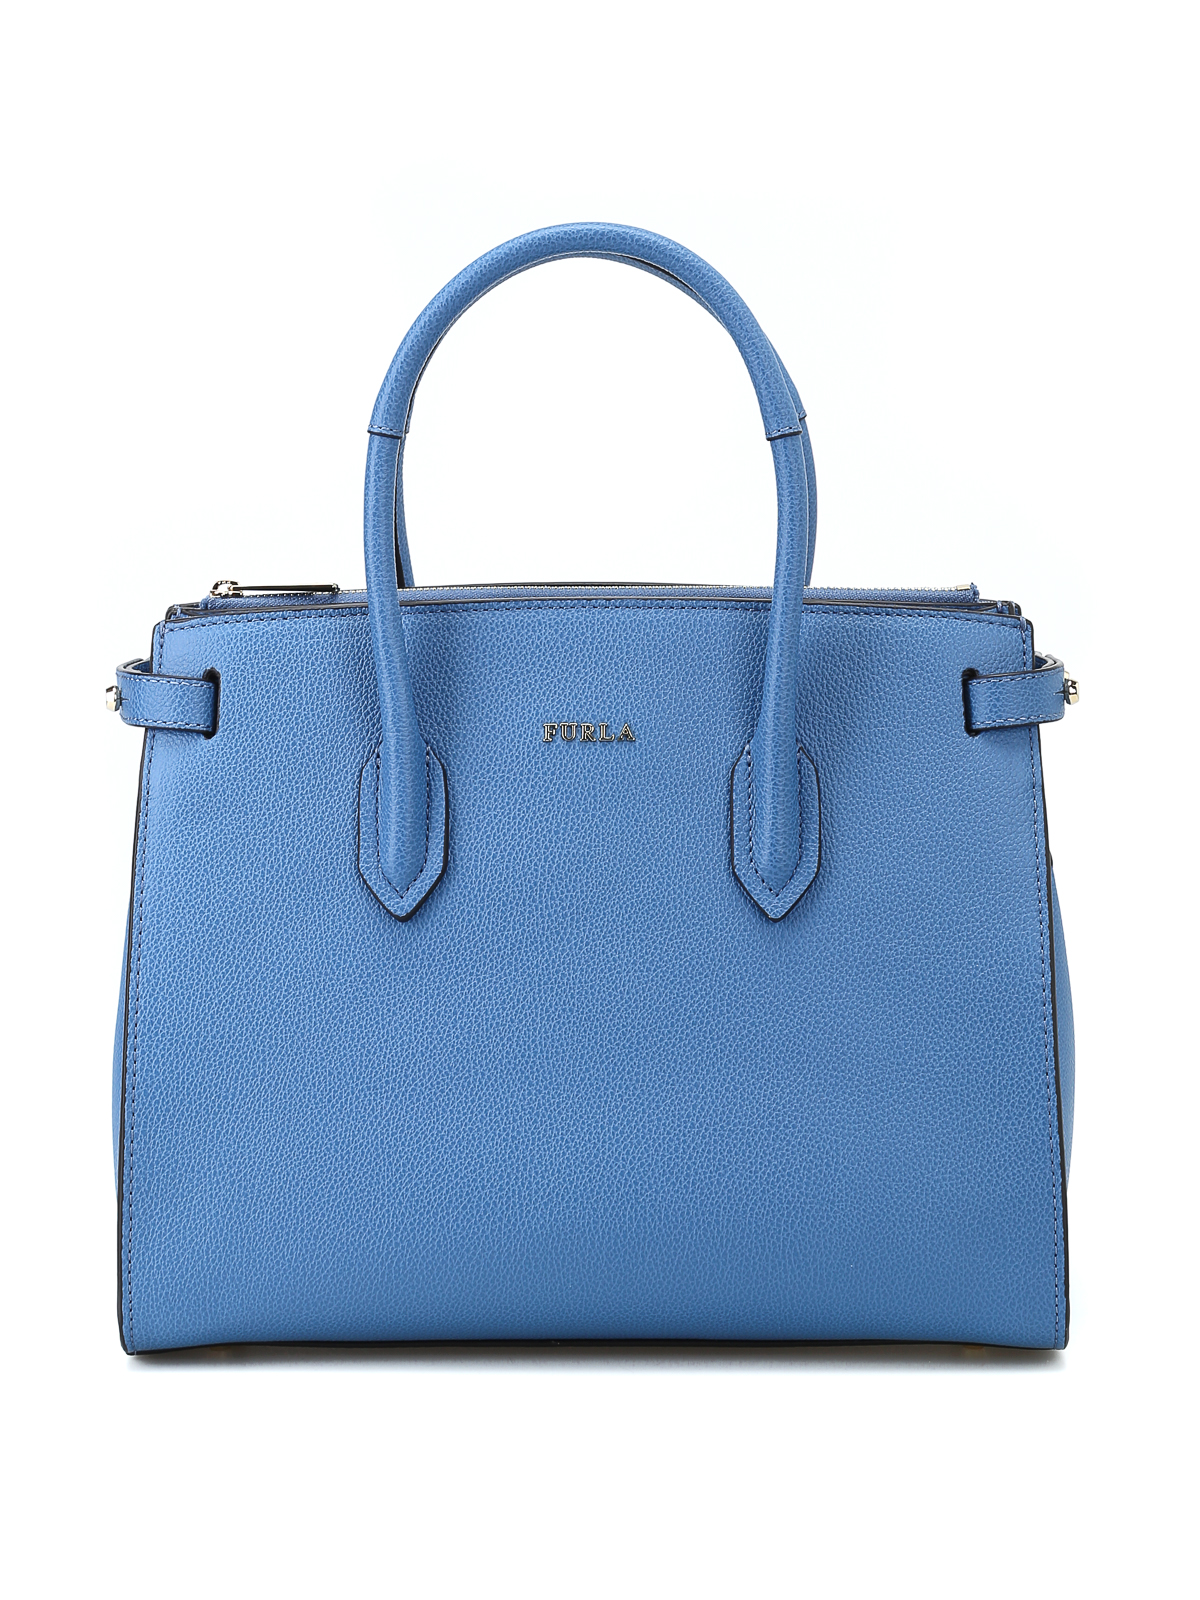 Furla - Pin cobalt blue leather small tote - totes bags - 963105